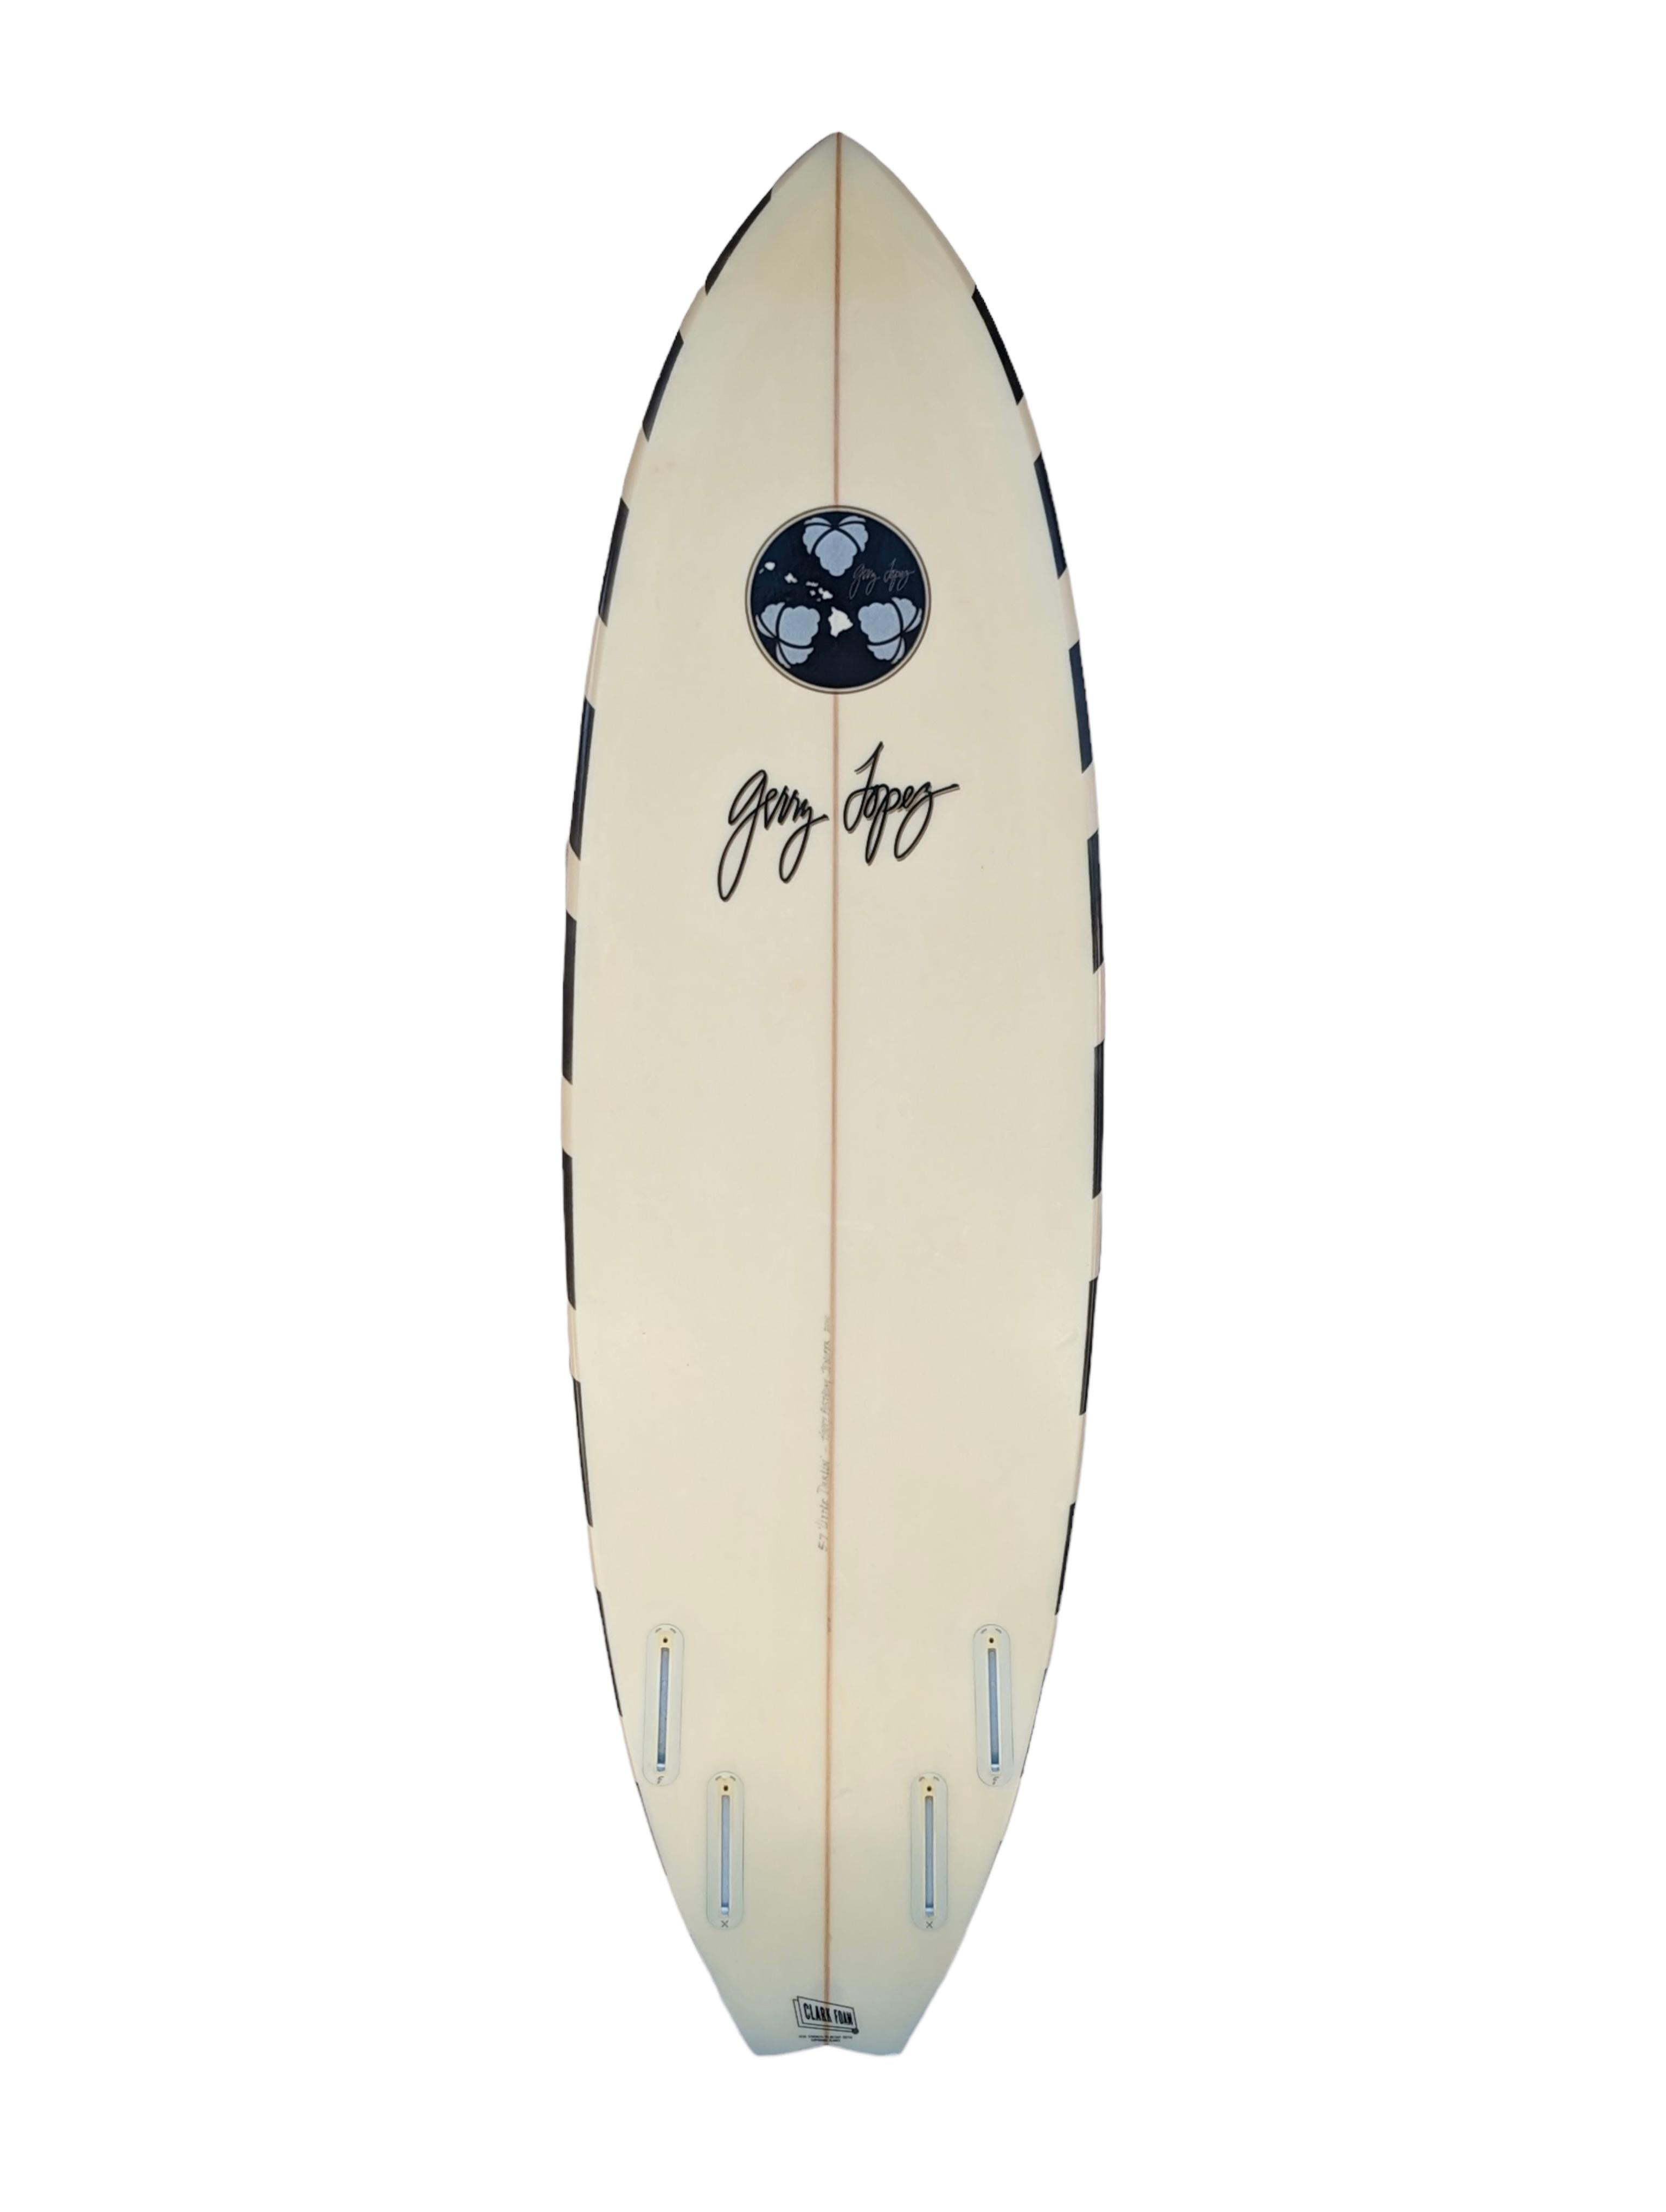 Collectible Gerry Lopez quad-fin surfboard. Featuring airbrushed tiger stripe design that Lopez boards were known for during the 1980s-1990s. Shape with a rare Clark Foam blank. A great example of the famous tiger striped Gerry Lopez surfboards!